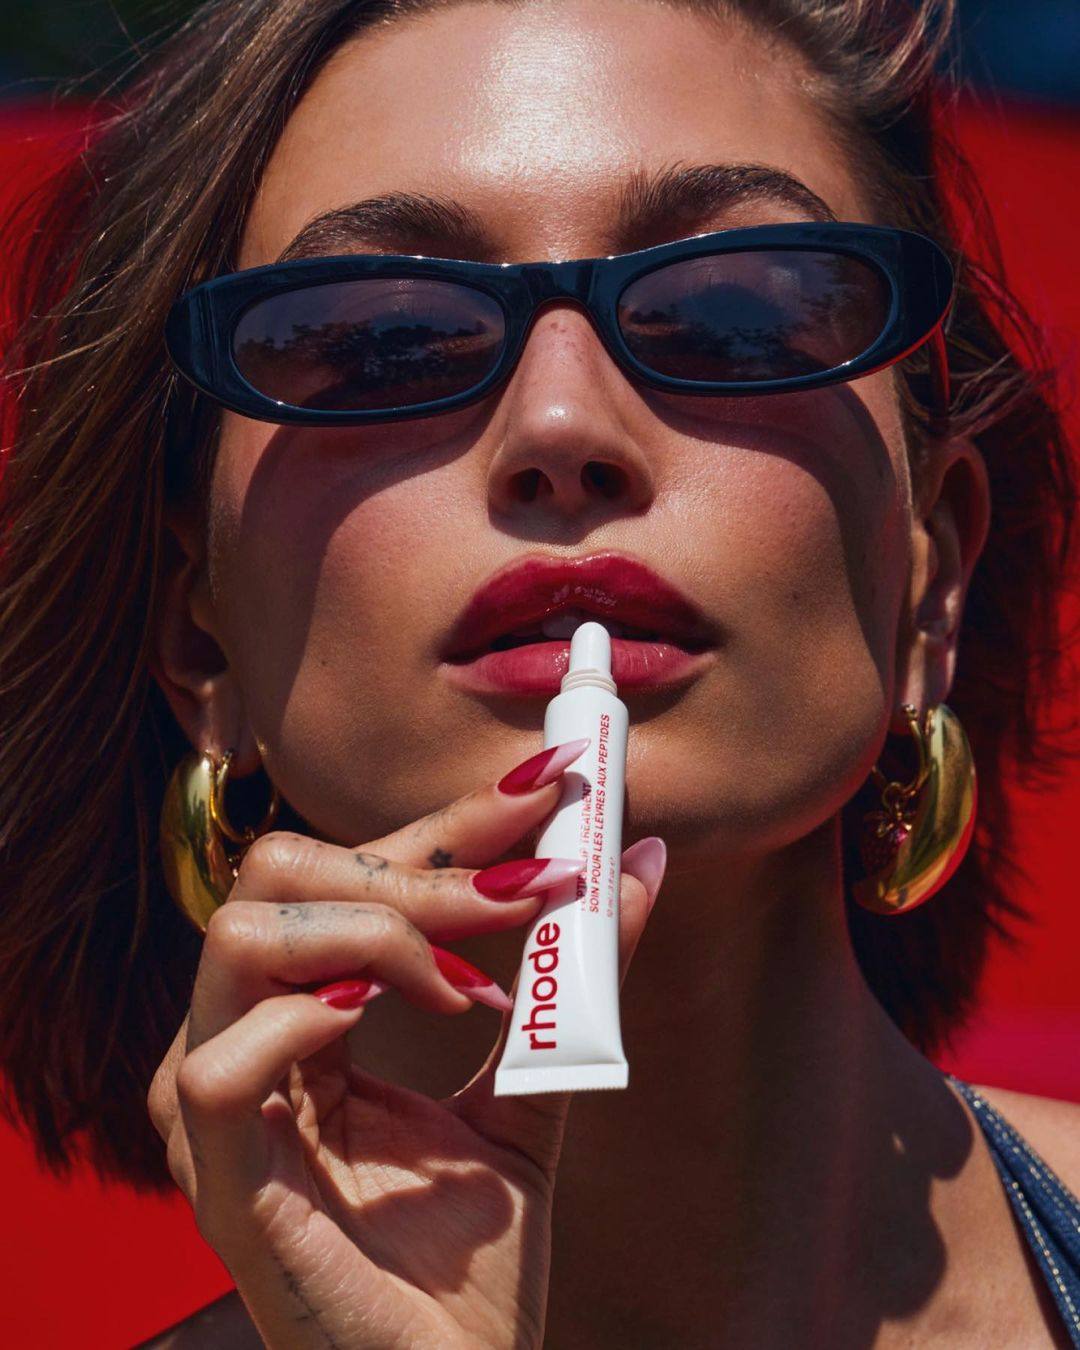 After popularising viral beauty looks, from “latte girl” to “strawberry girl” make-up, Hailey Bieber has shared her love for Rhode peptide lip tints. Photo: Instagram/@rhode